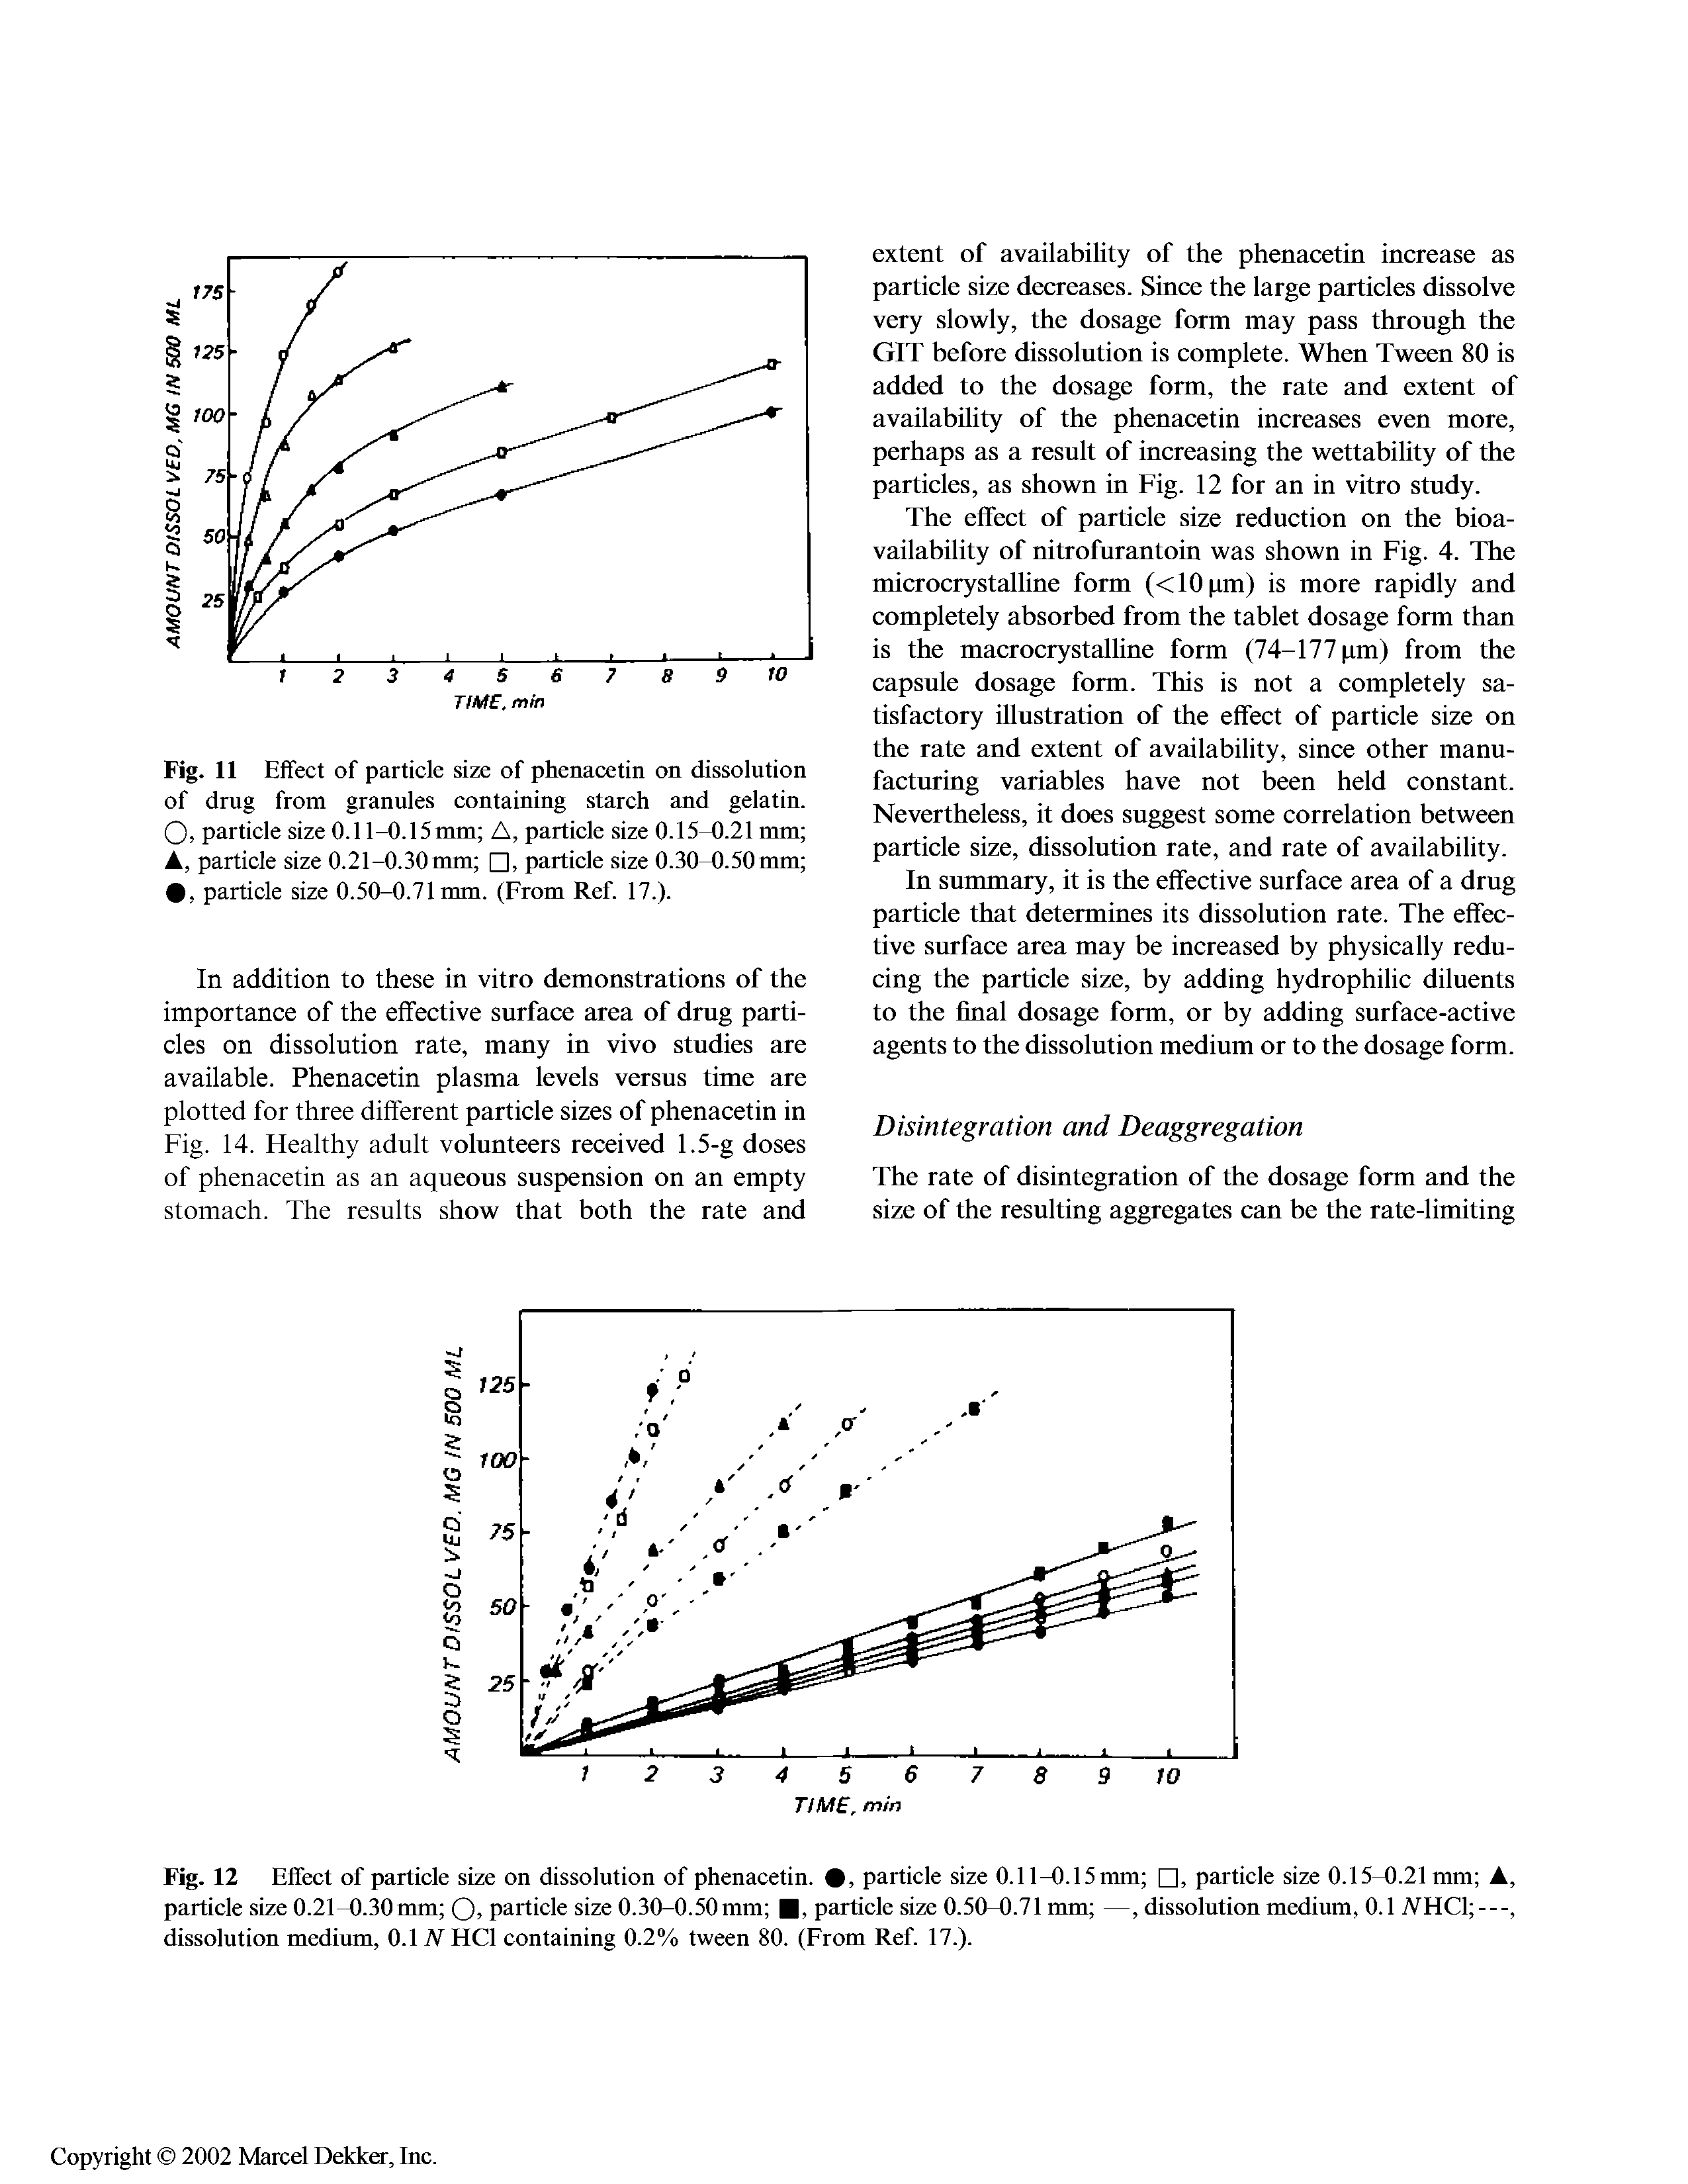 Fig. 11 Effect of particle size of phenacetin on dissolution of drug from granules containing starch and gelatin. Q, particle size 0.11-0.15mm A, particle size 0.15-0.21 mm , particle size 0.21-0.30mm , particle size 0.30-0.50mm , particle size 0.50-0.71 mm. (From Ref. 17.).